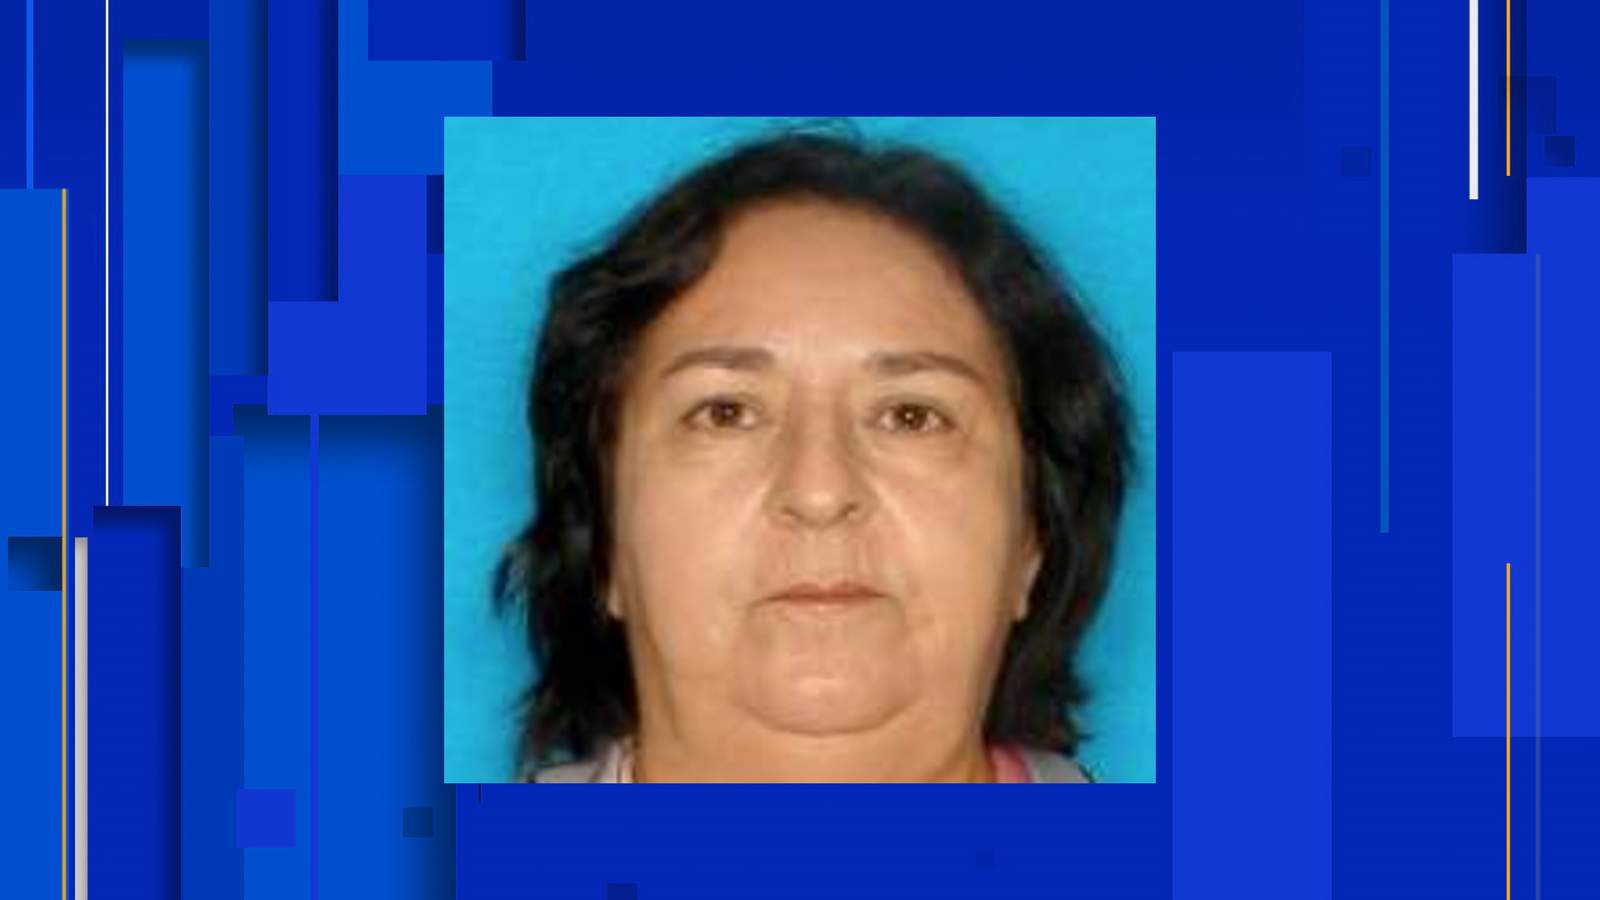 SILVER ALERT: Mathis police search for missing 74-year-old woman with cognitive impairment